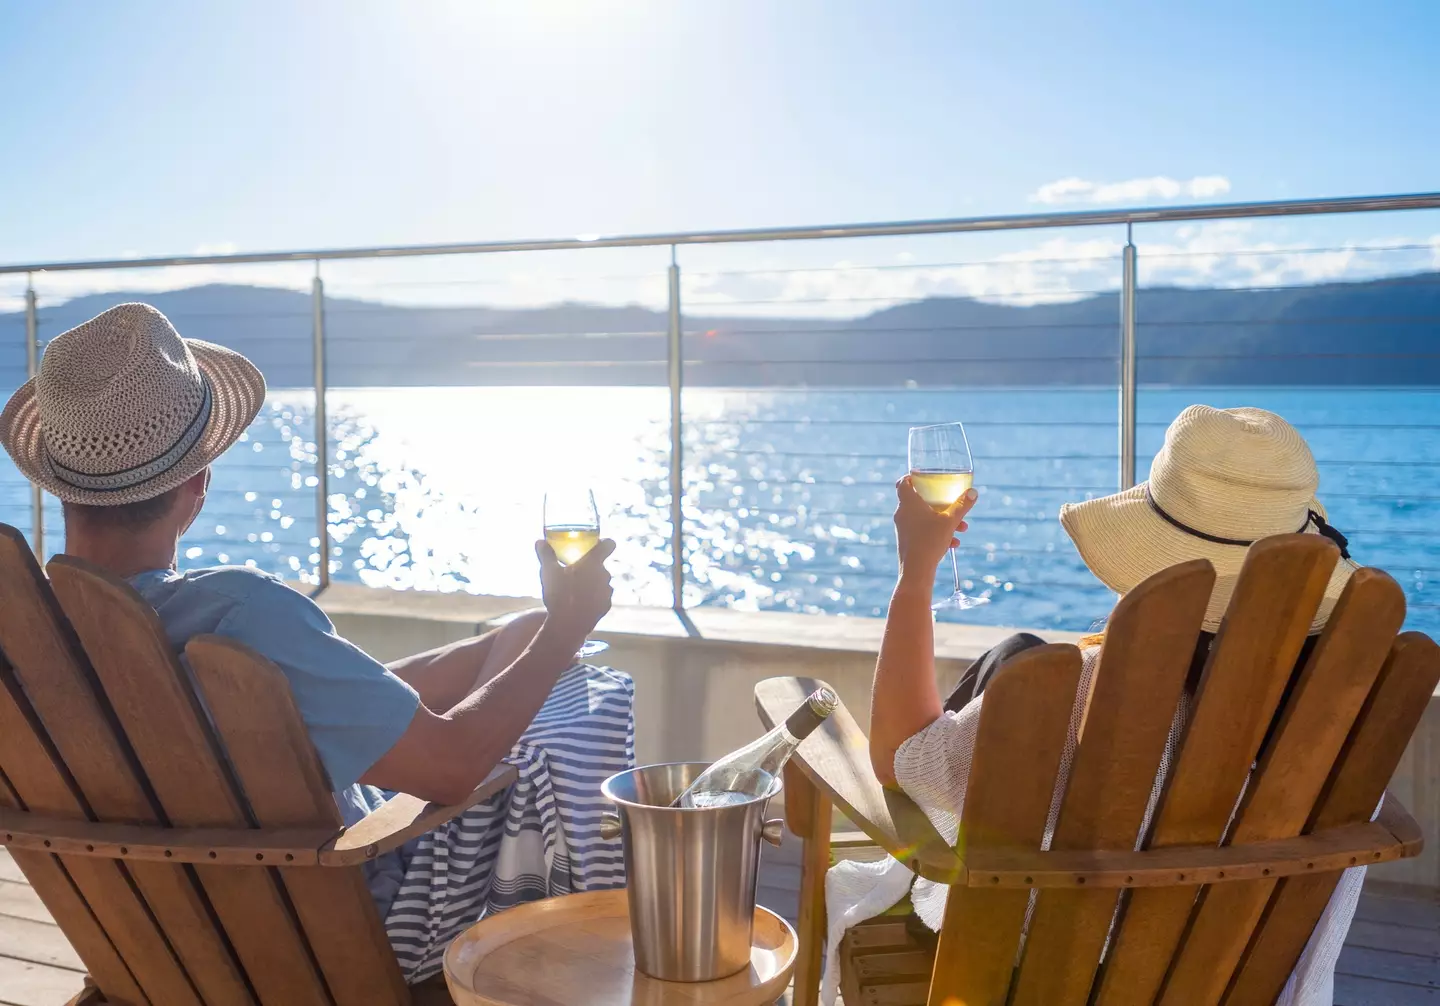 P&O outlined their policy on 'responsible drinking'. (courtneyk / Getty Images)